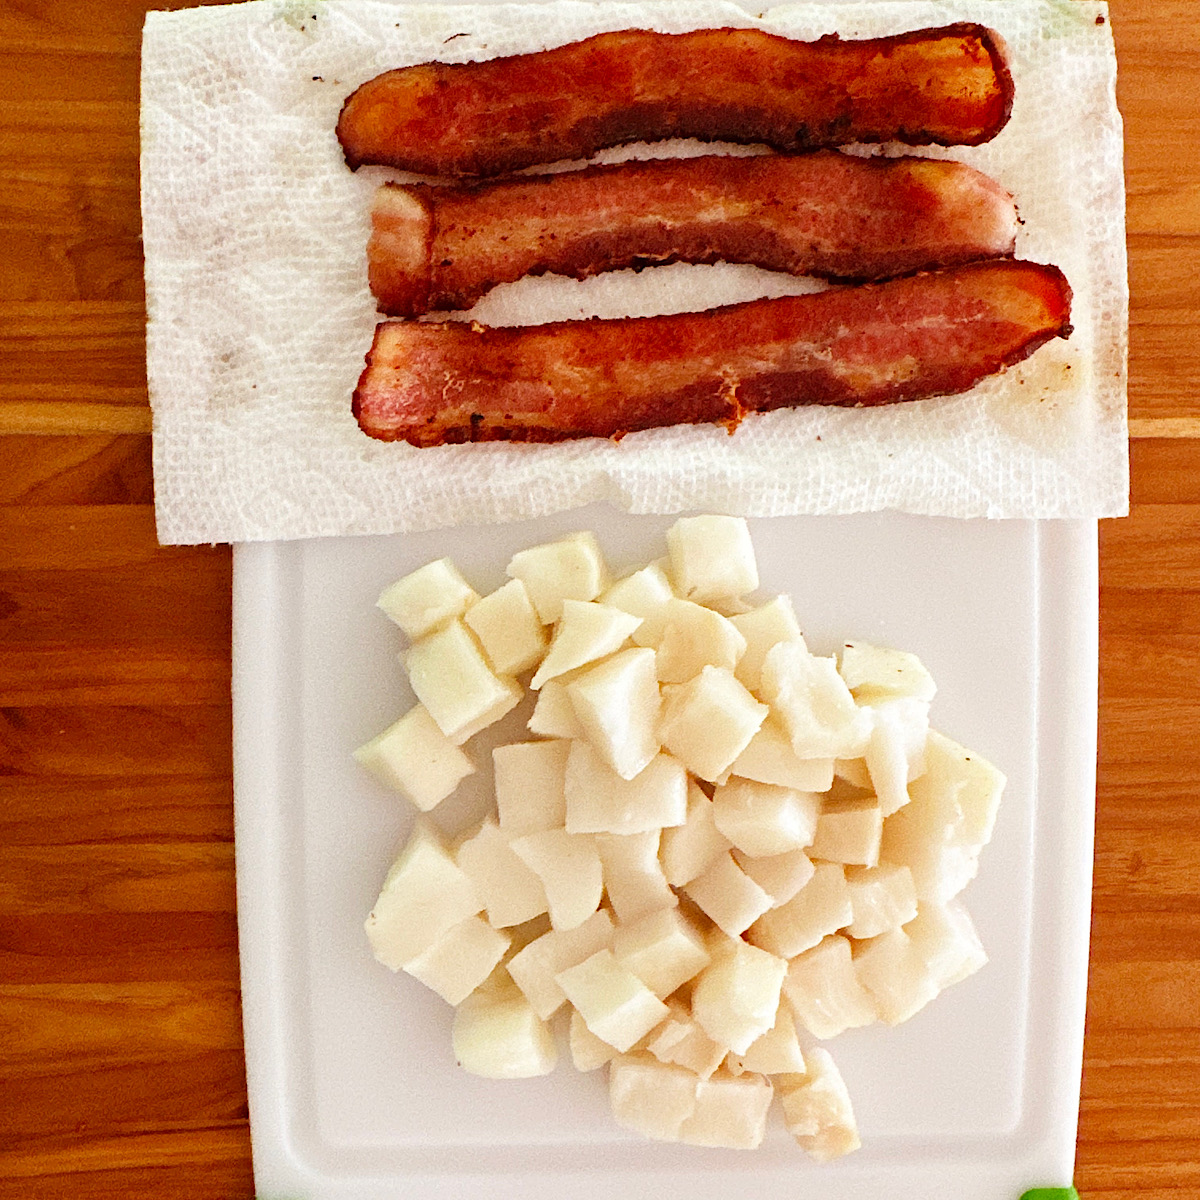 3 slices bacon and chopped cod on cutting board.